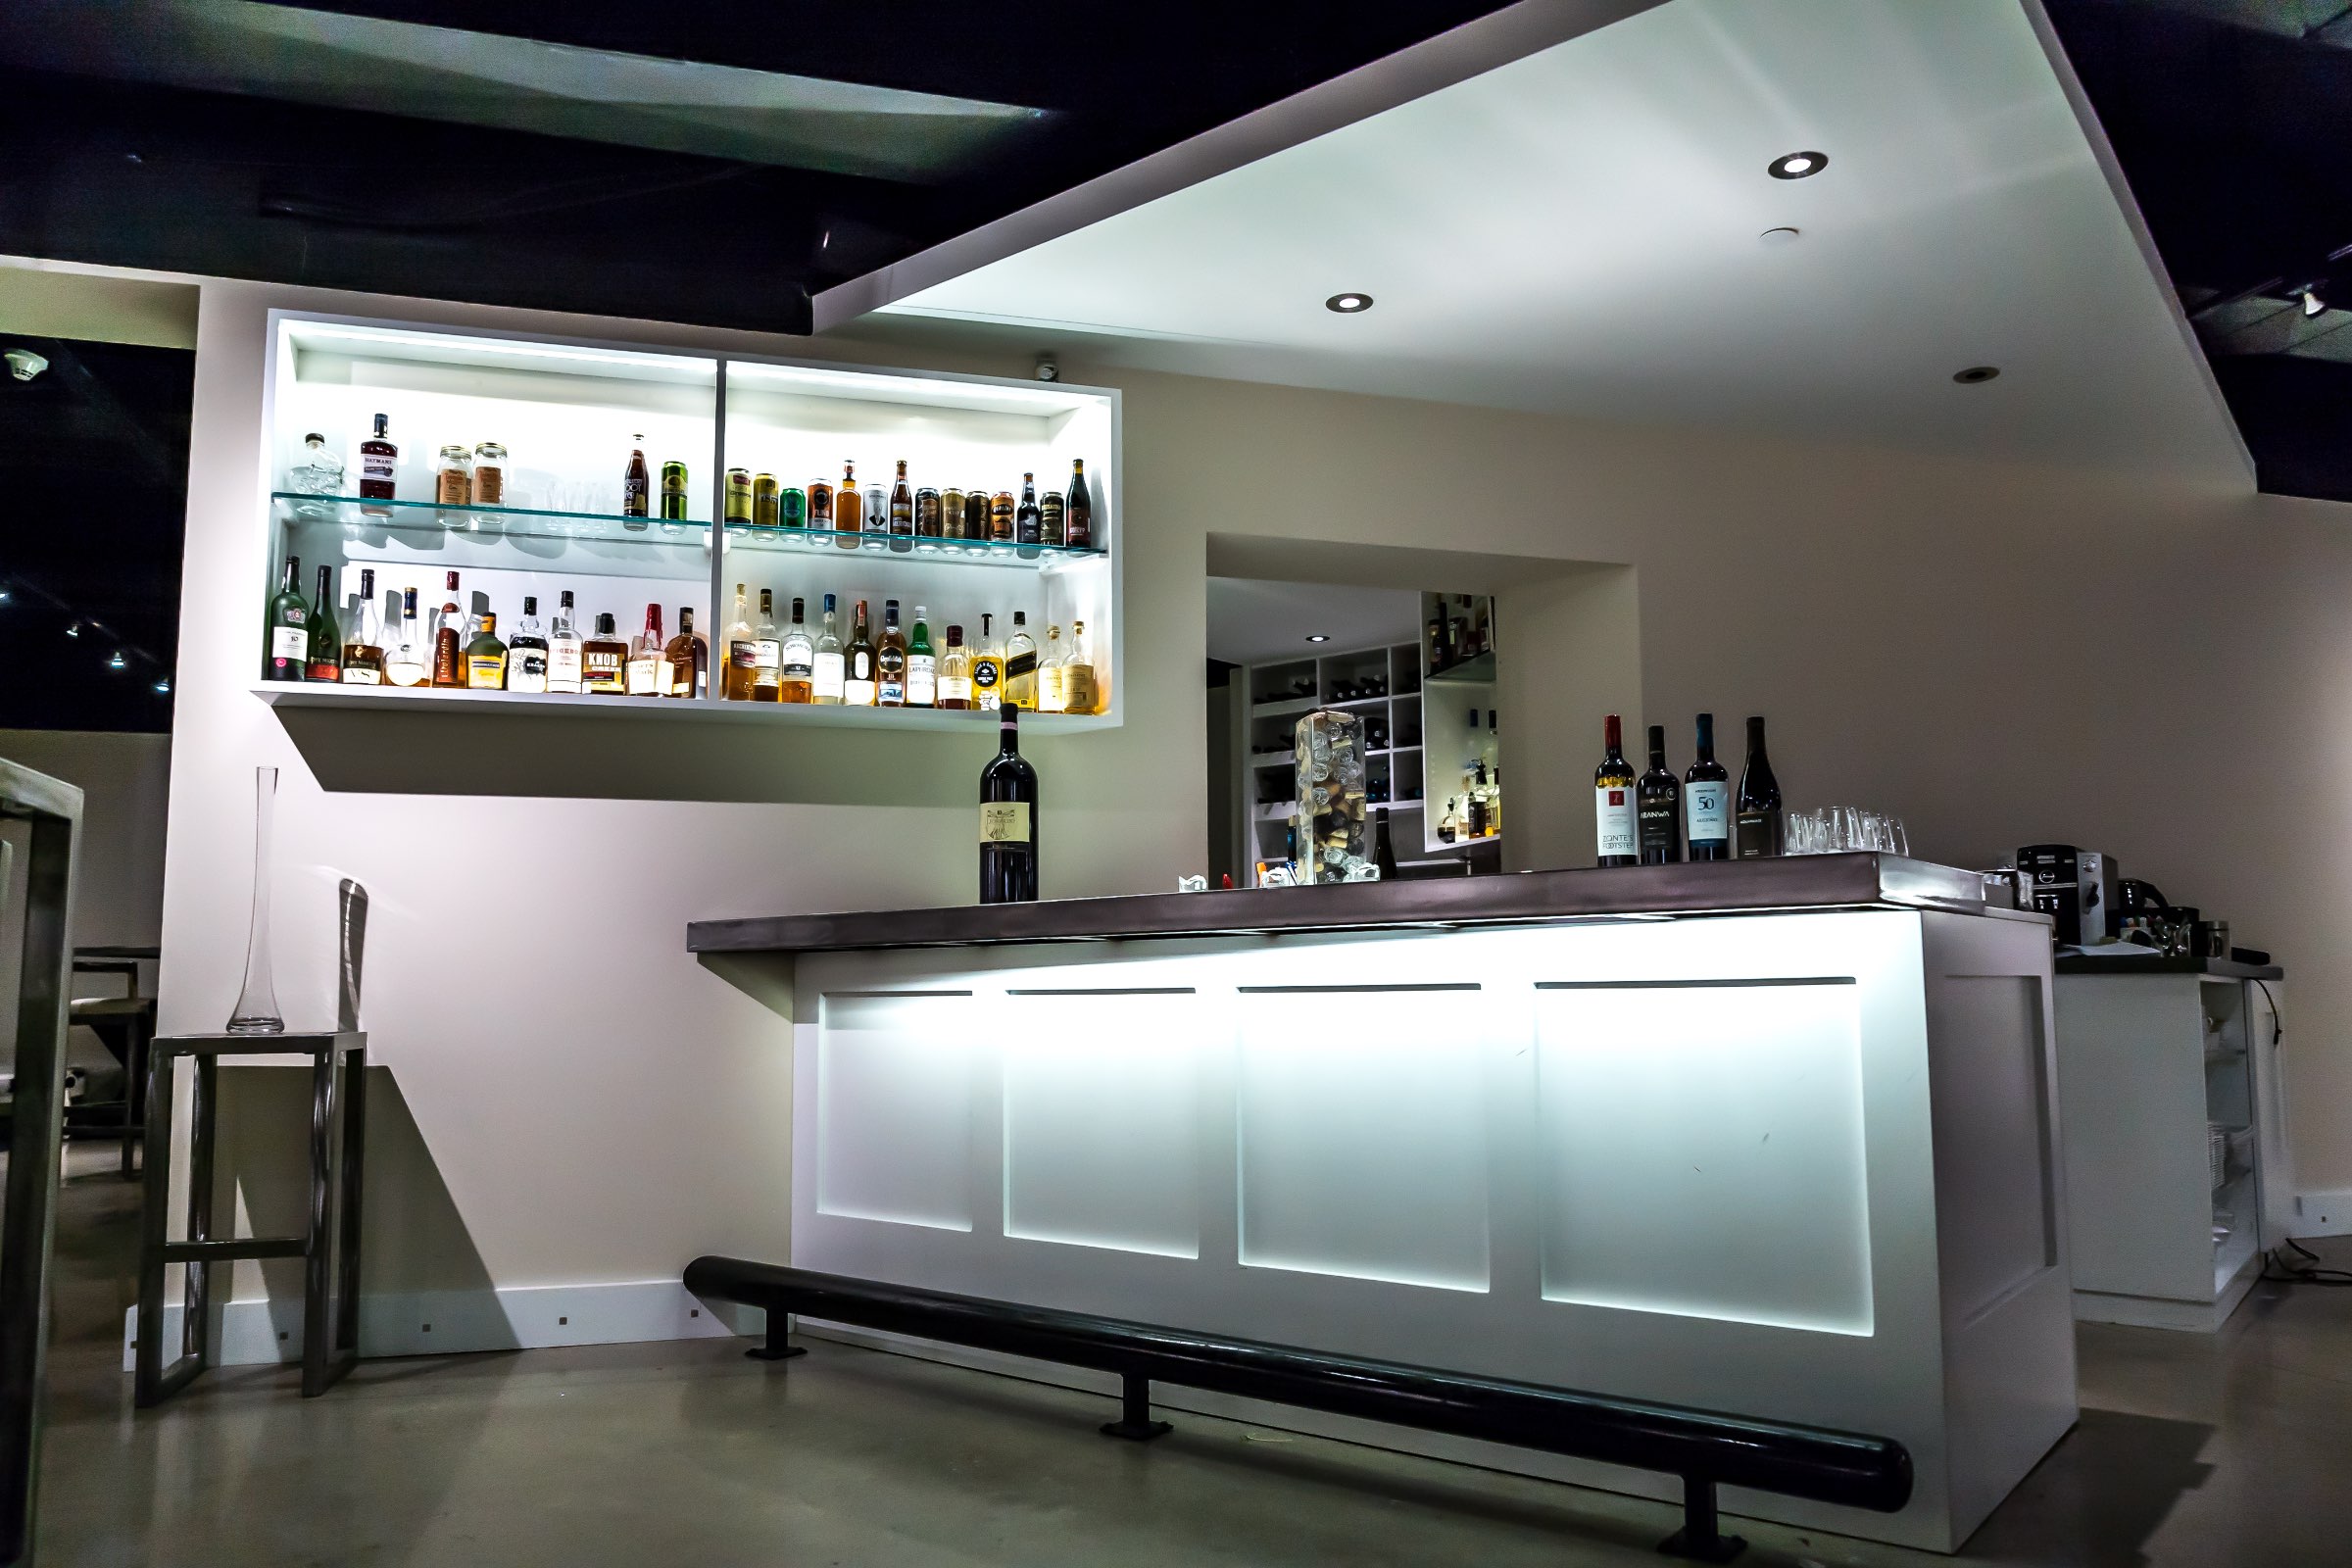 The lounge bar is shown at an angle and spotlit using dramatic lighting, with all the drinks available in a wall mounted display case to the left.